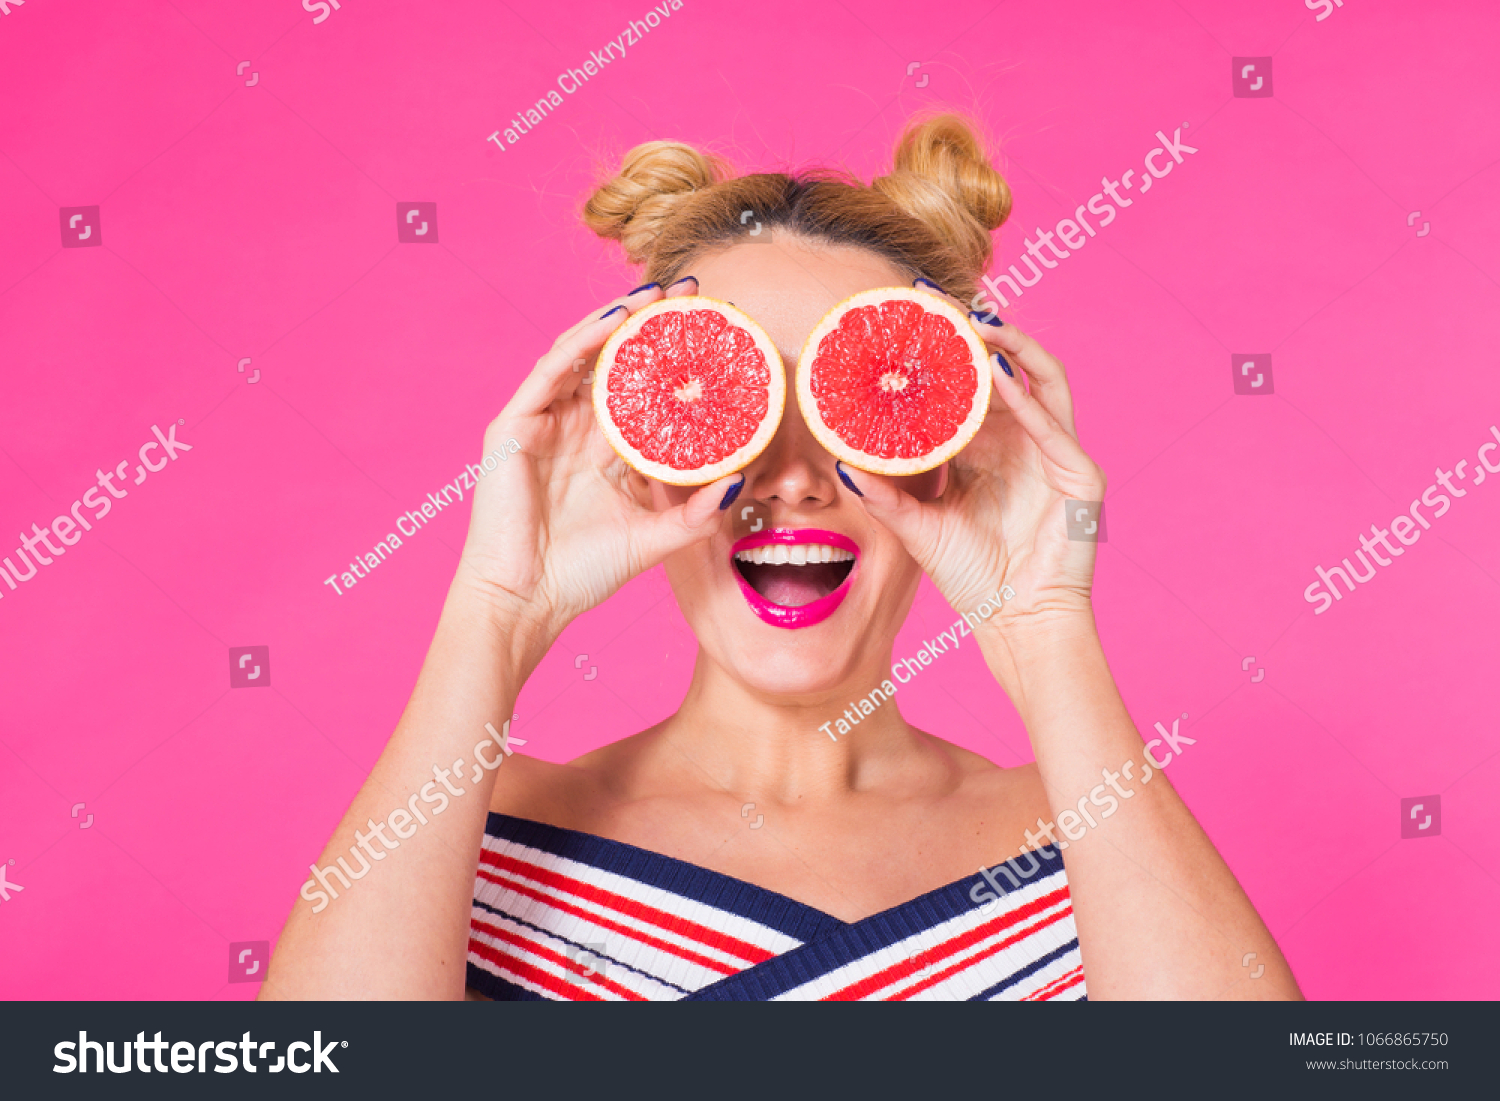 Beauty Model Girl takes Juicy Grapefruit. Beautiful Joyful young girl, funny blonde hairstyle and pink makeup.Holding Orange Slices and laughing, emotions. #1066865750